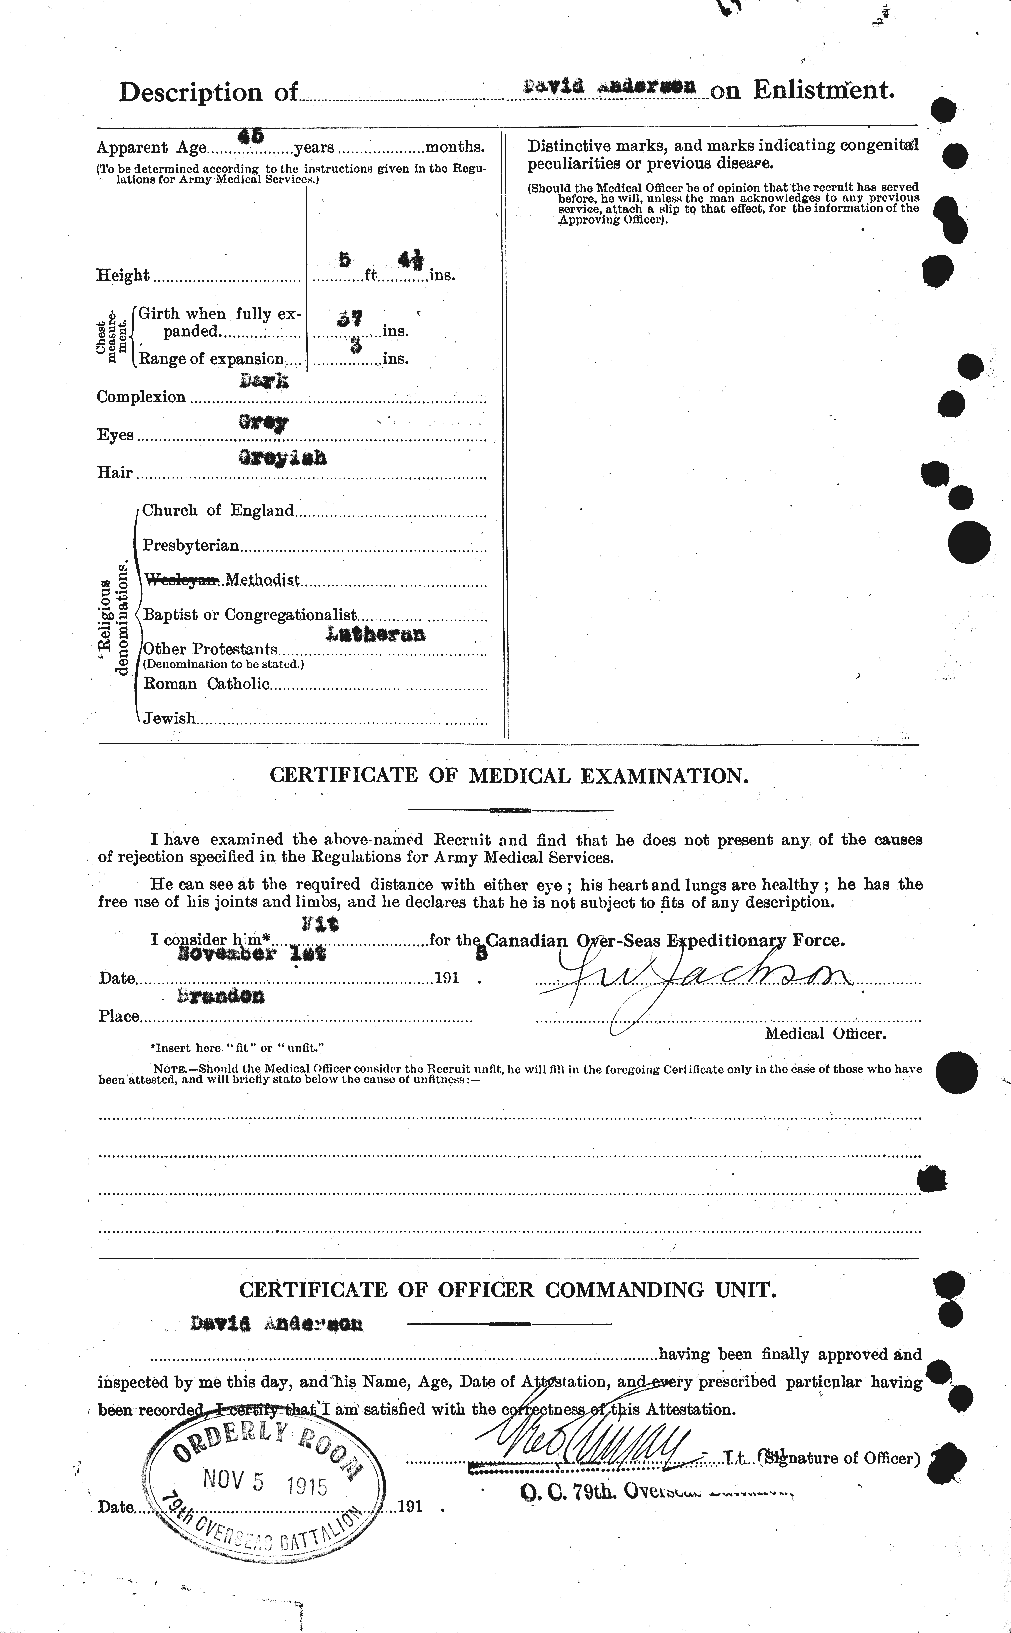 Personnel Records of the First World War - CEF 210023b